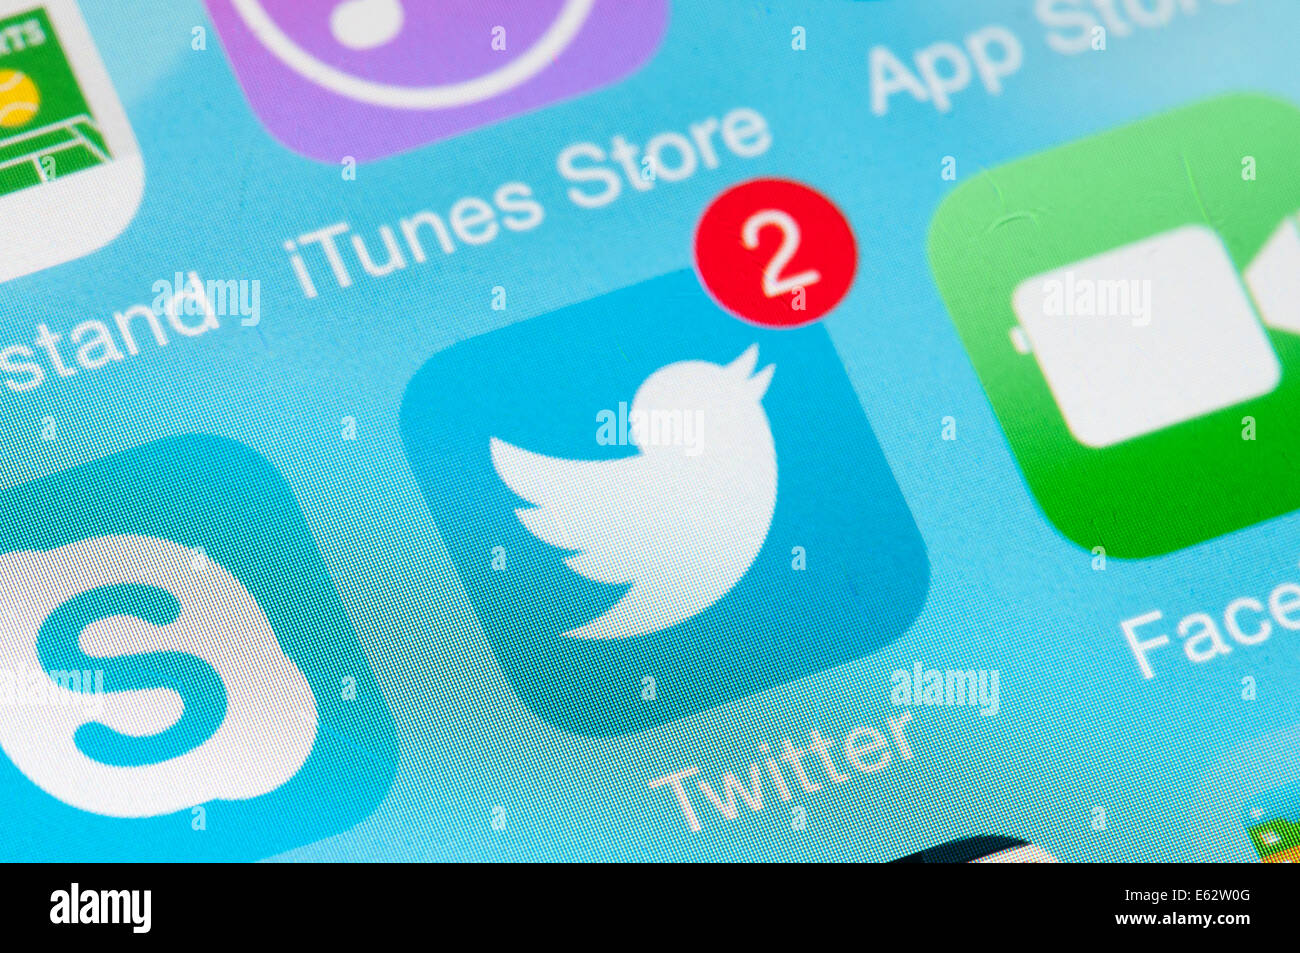 Twitter logo icon in mobile screen Stock Photo